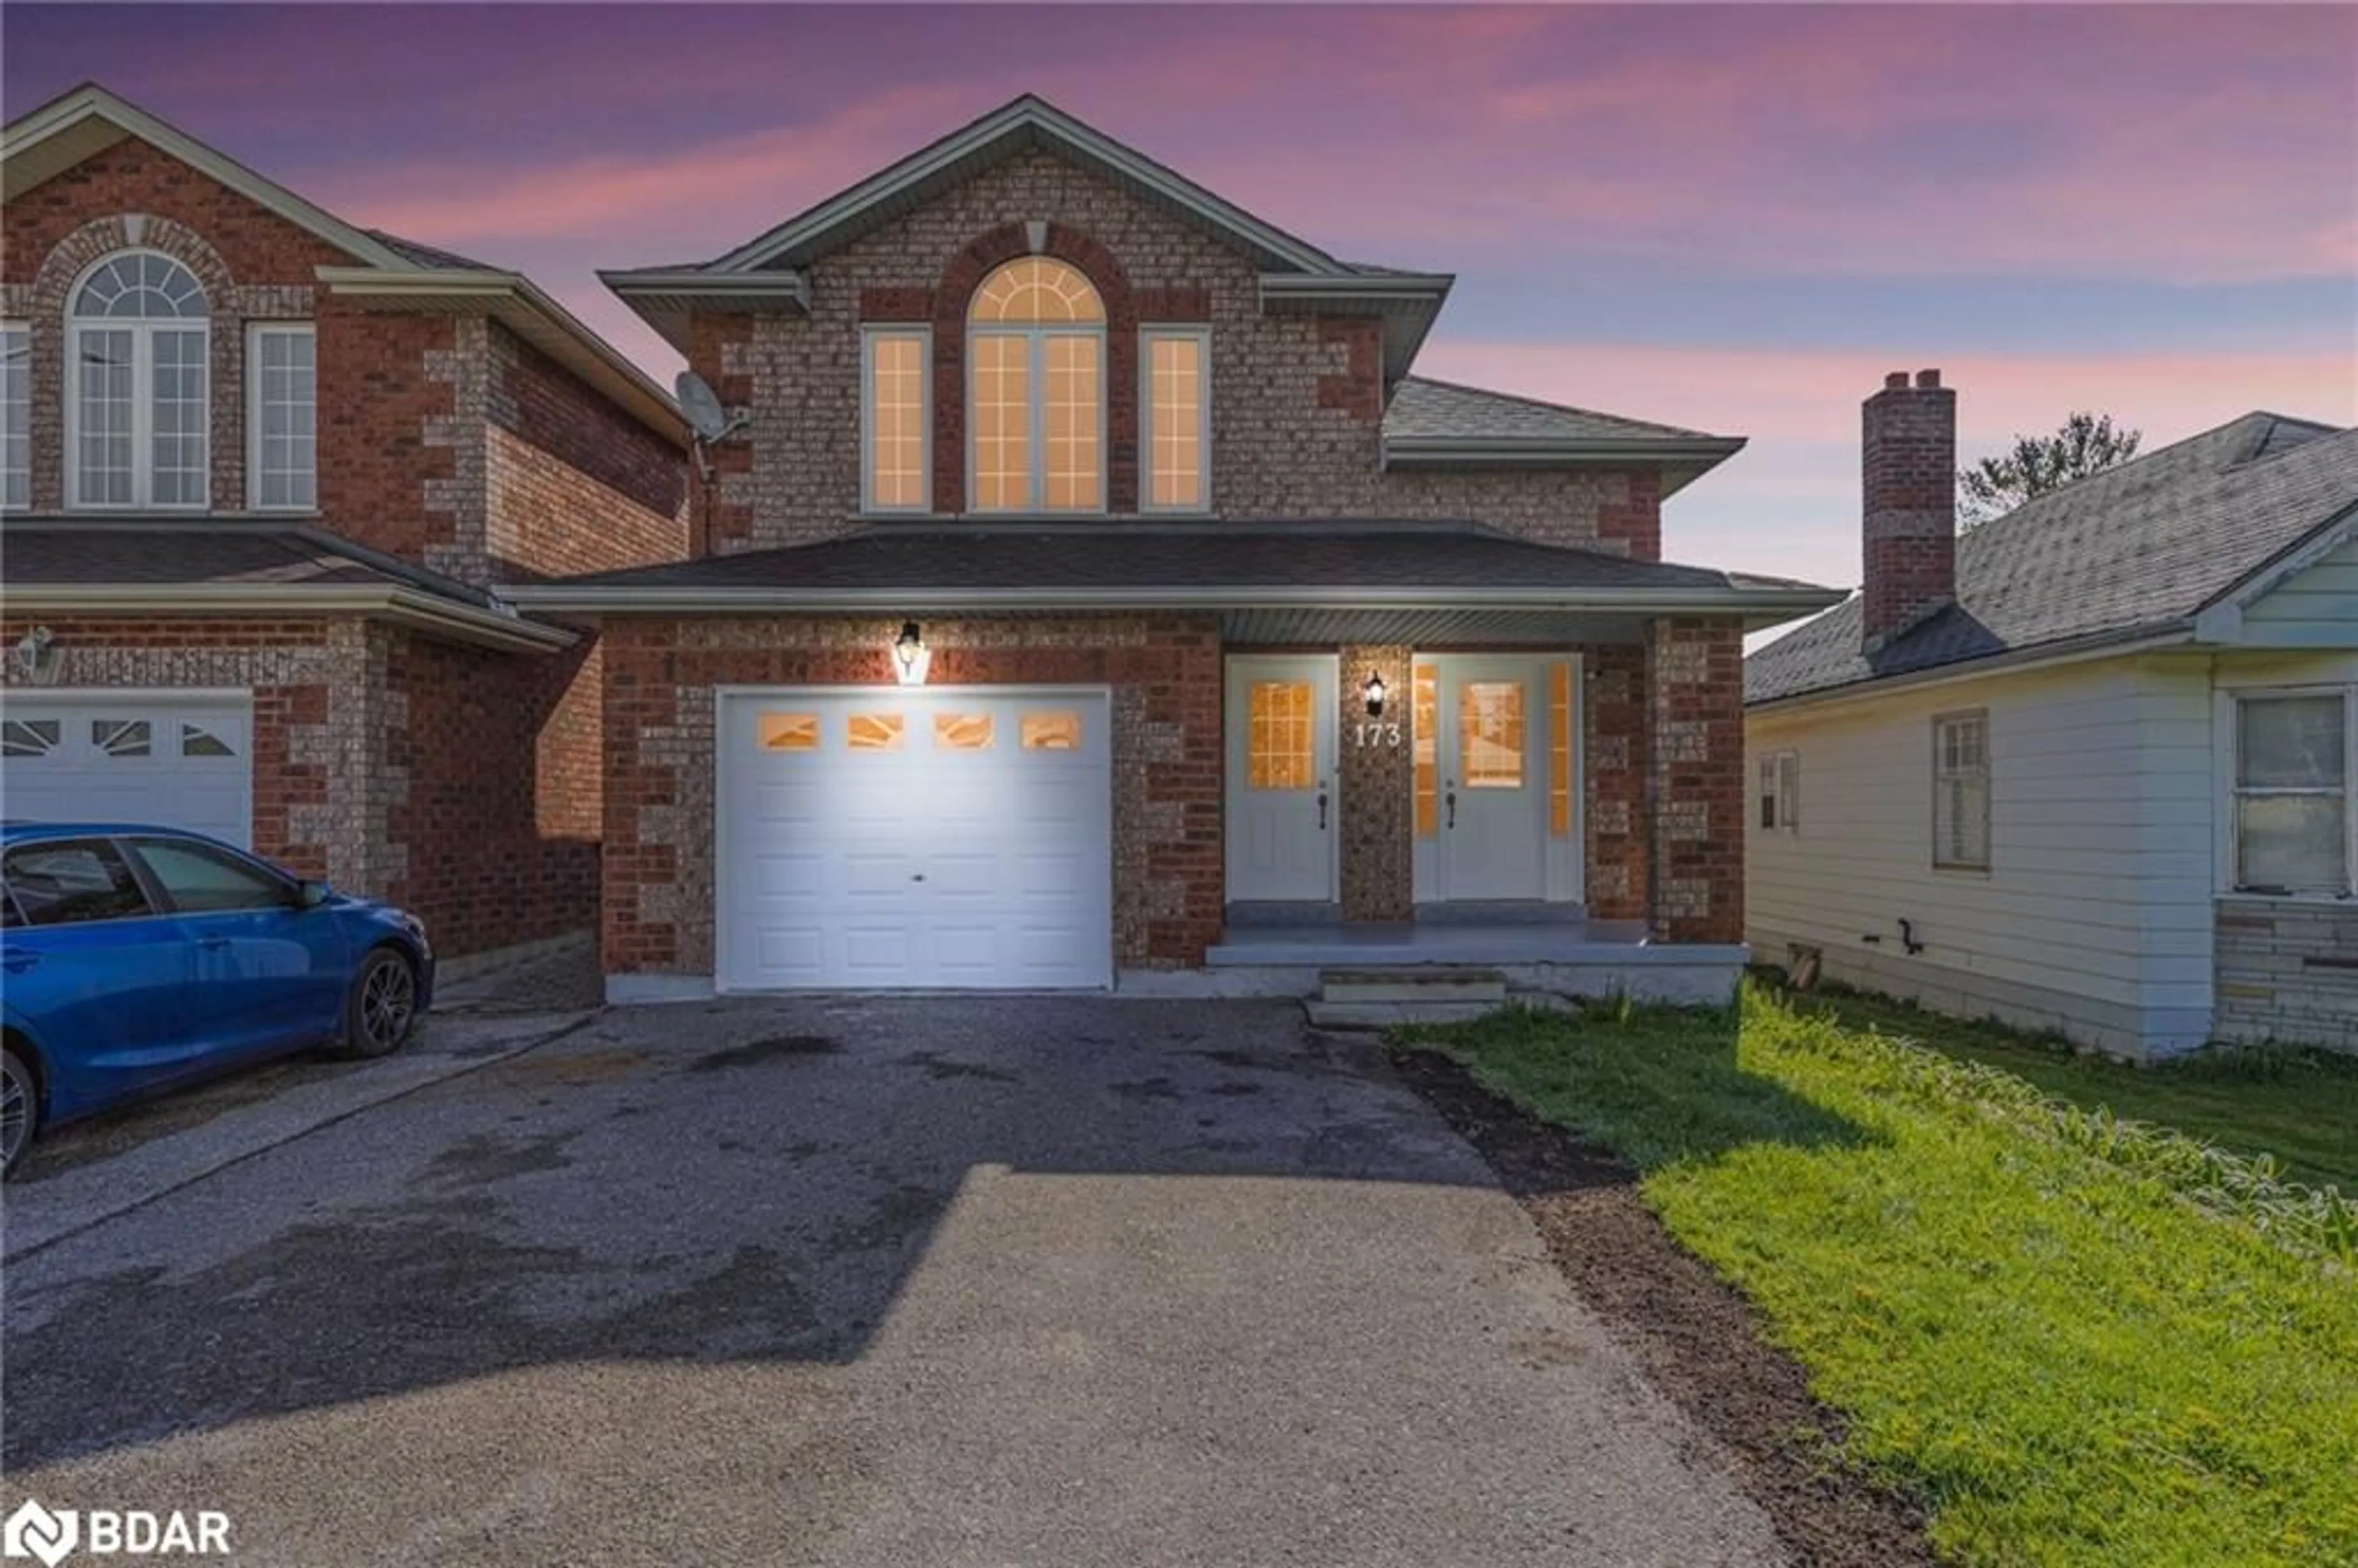 Frontside or backside of a home for 173 Simcoe Street, Bradford West Gwillimbury Ontario L3Z 1Y3